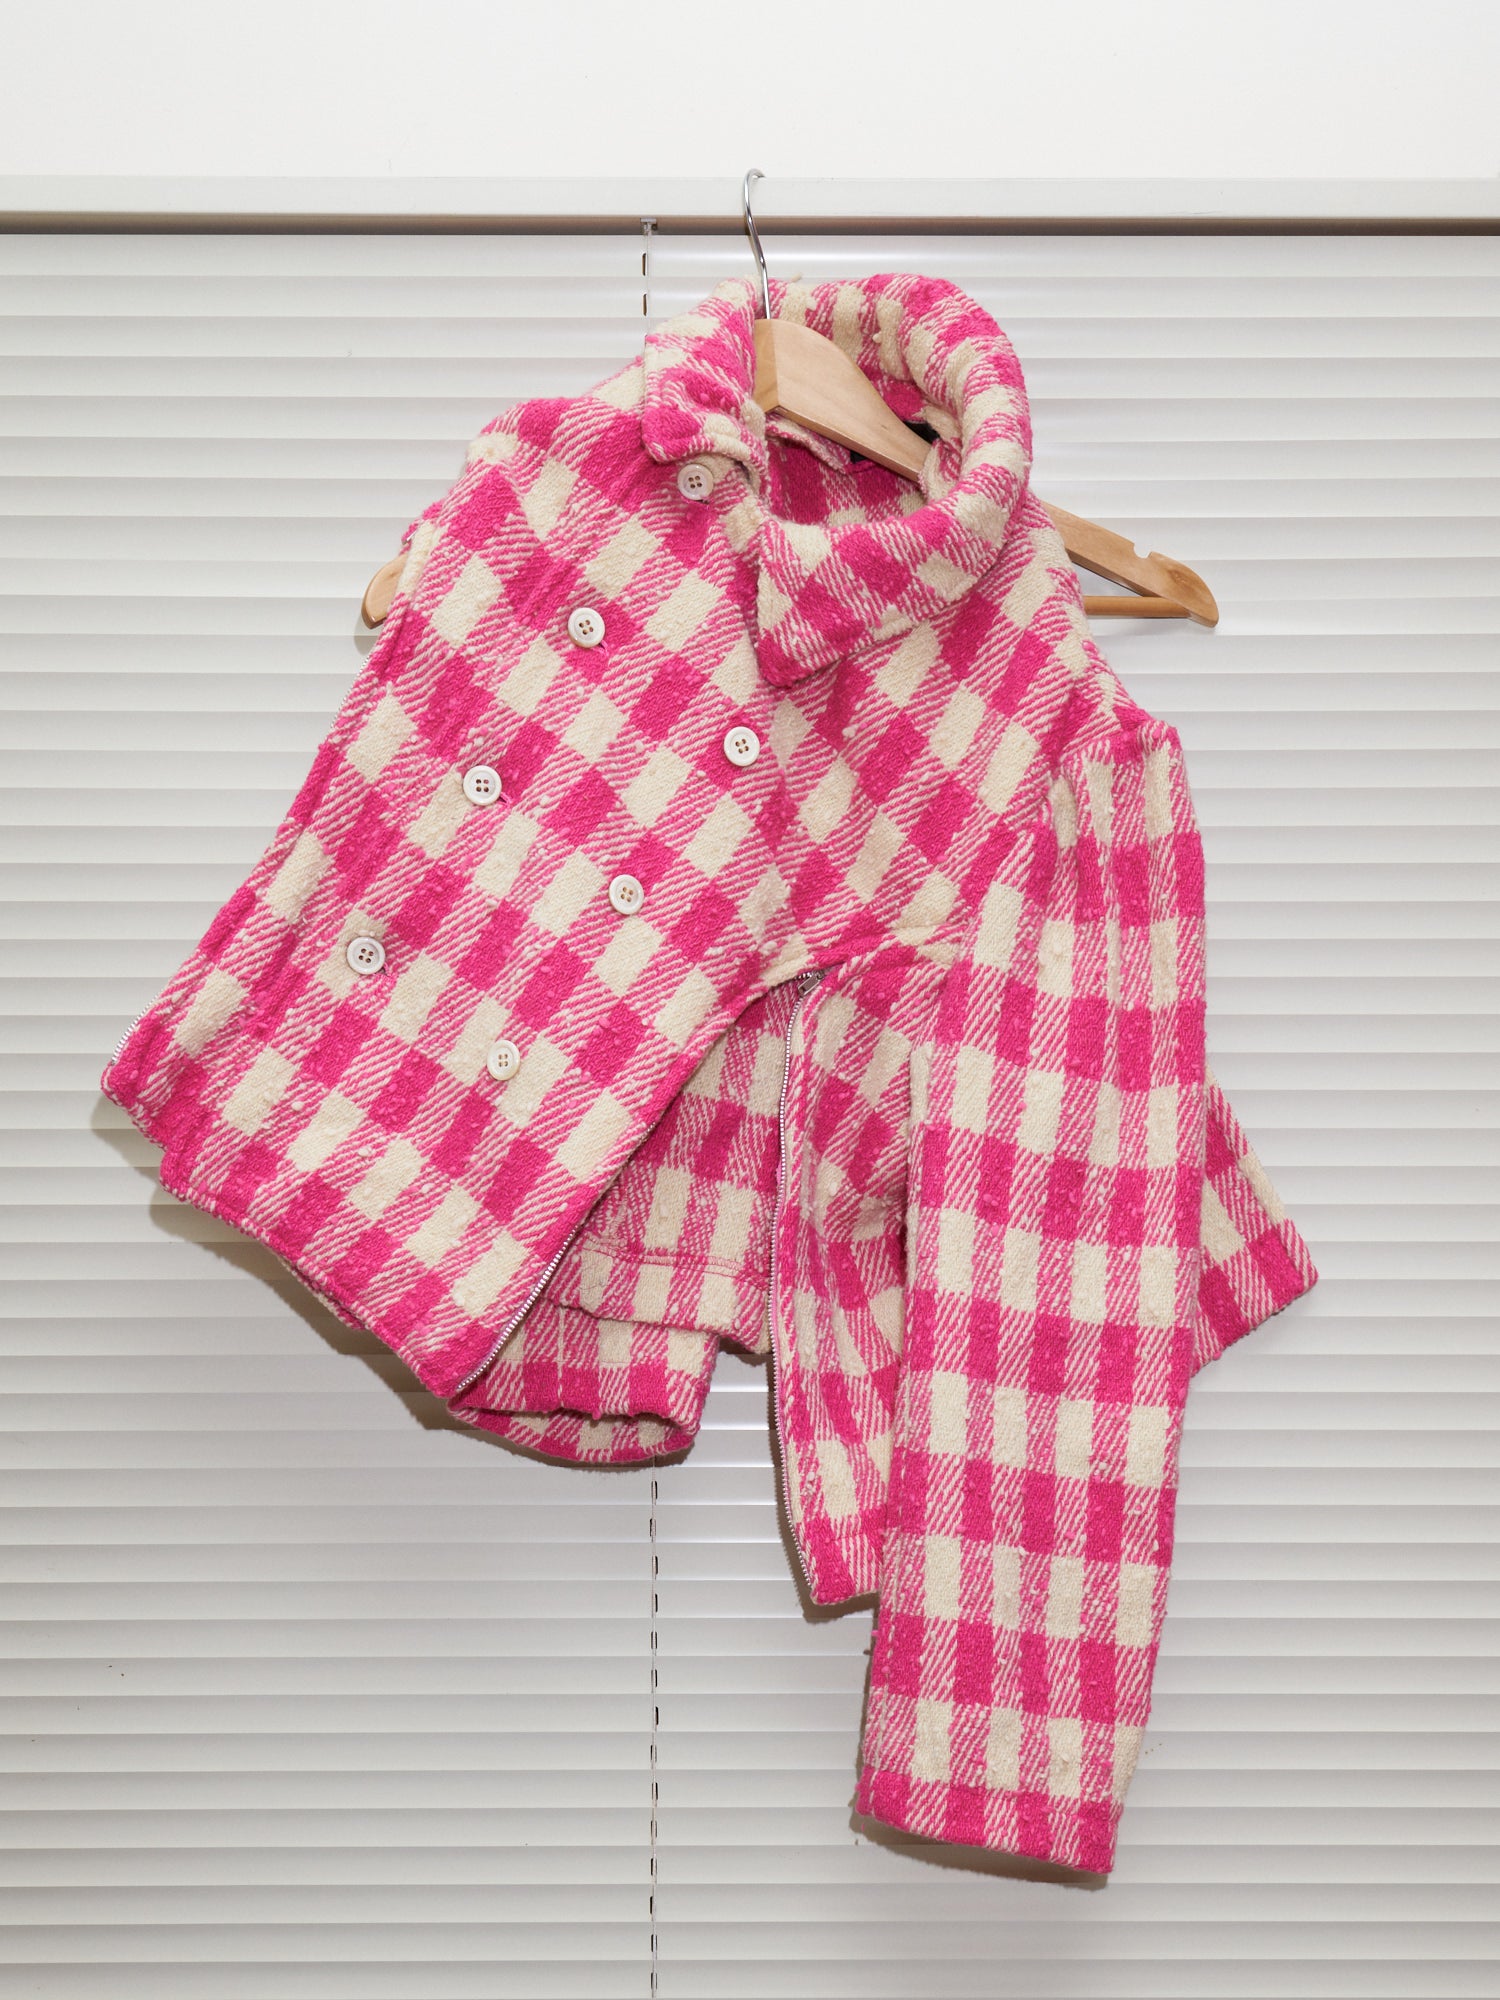 Comme des Garcons 1991 pink cream wool check zipped seam peacoat - womens S